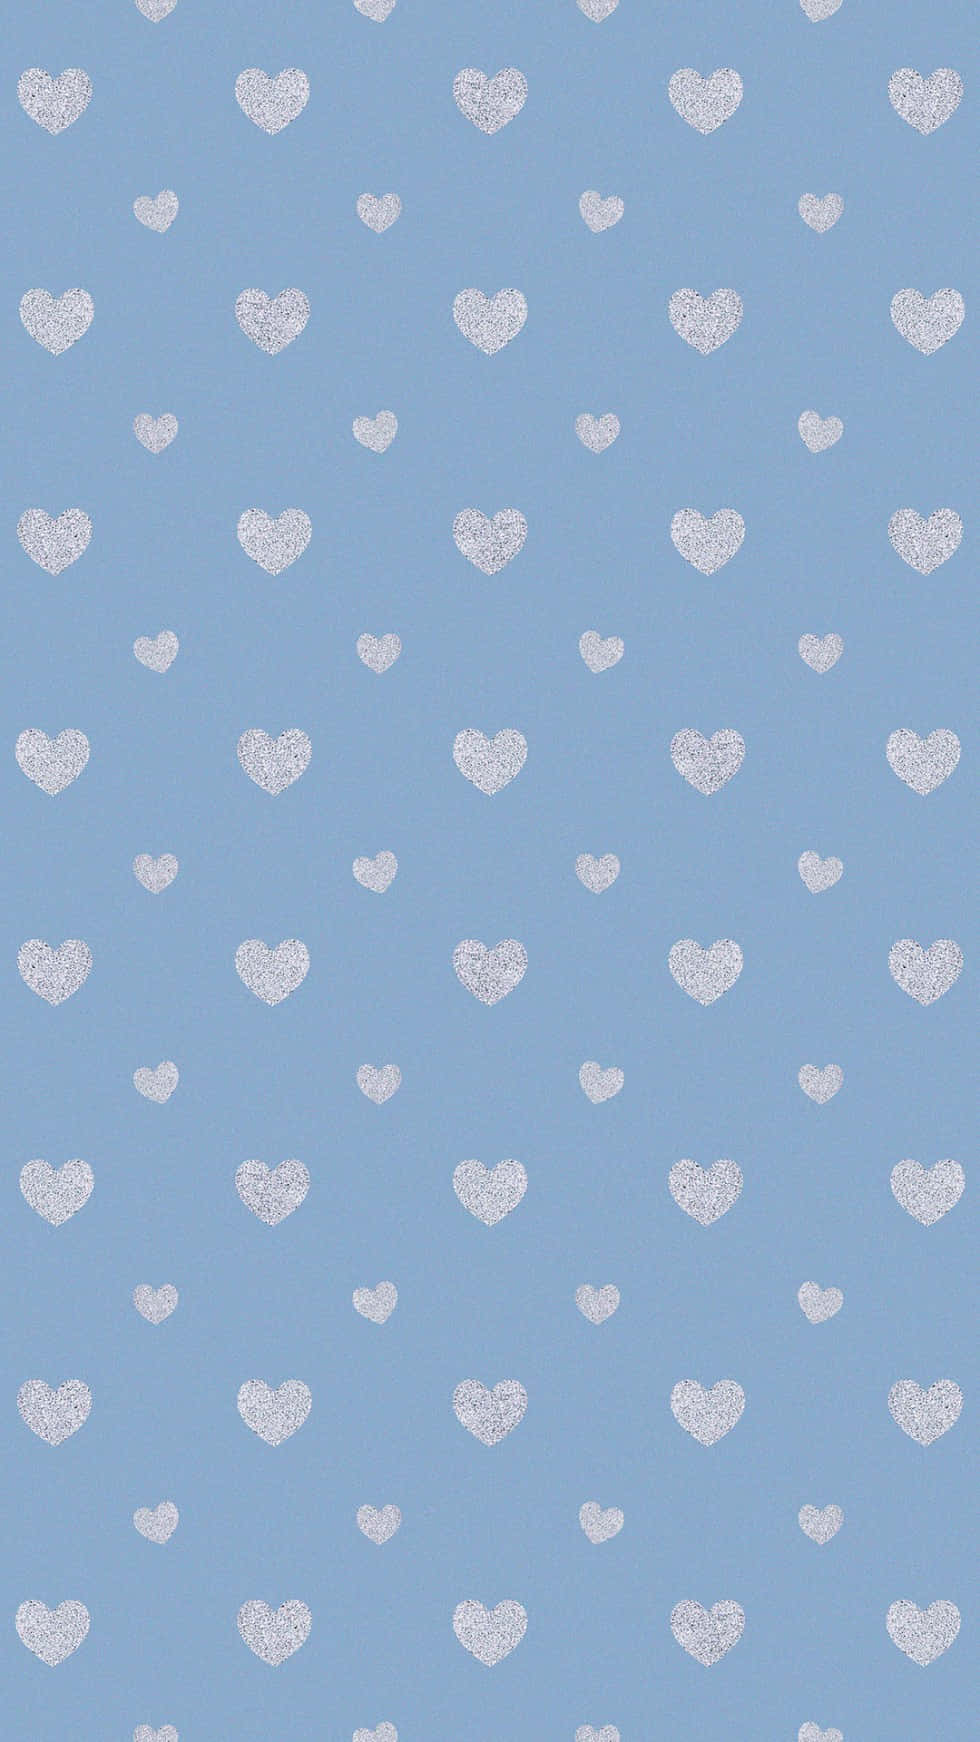 Aesthetic Blue Heart Pattern pictures